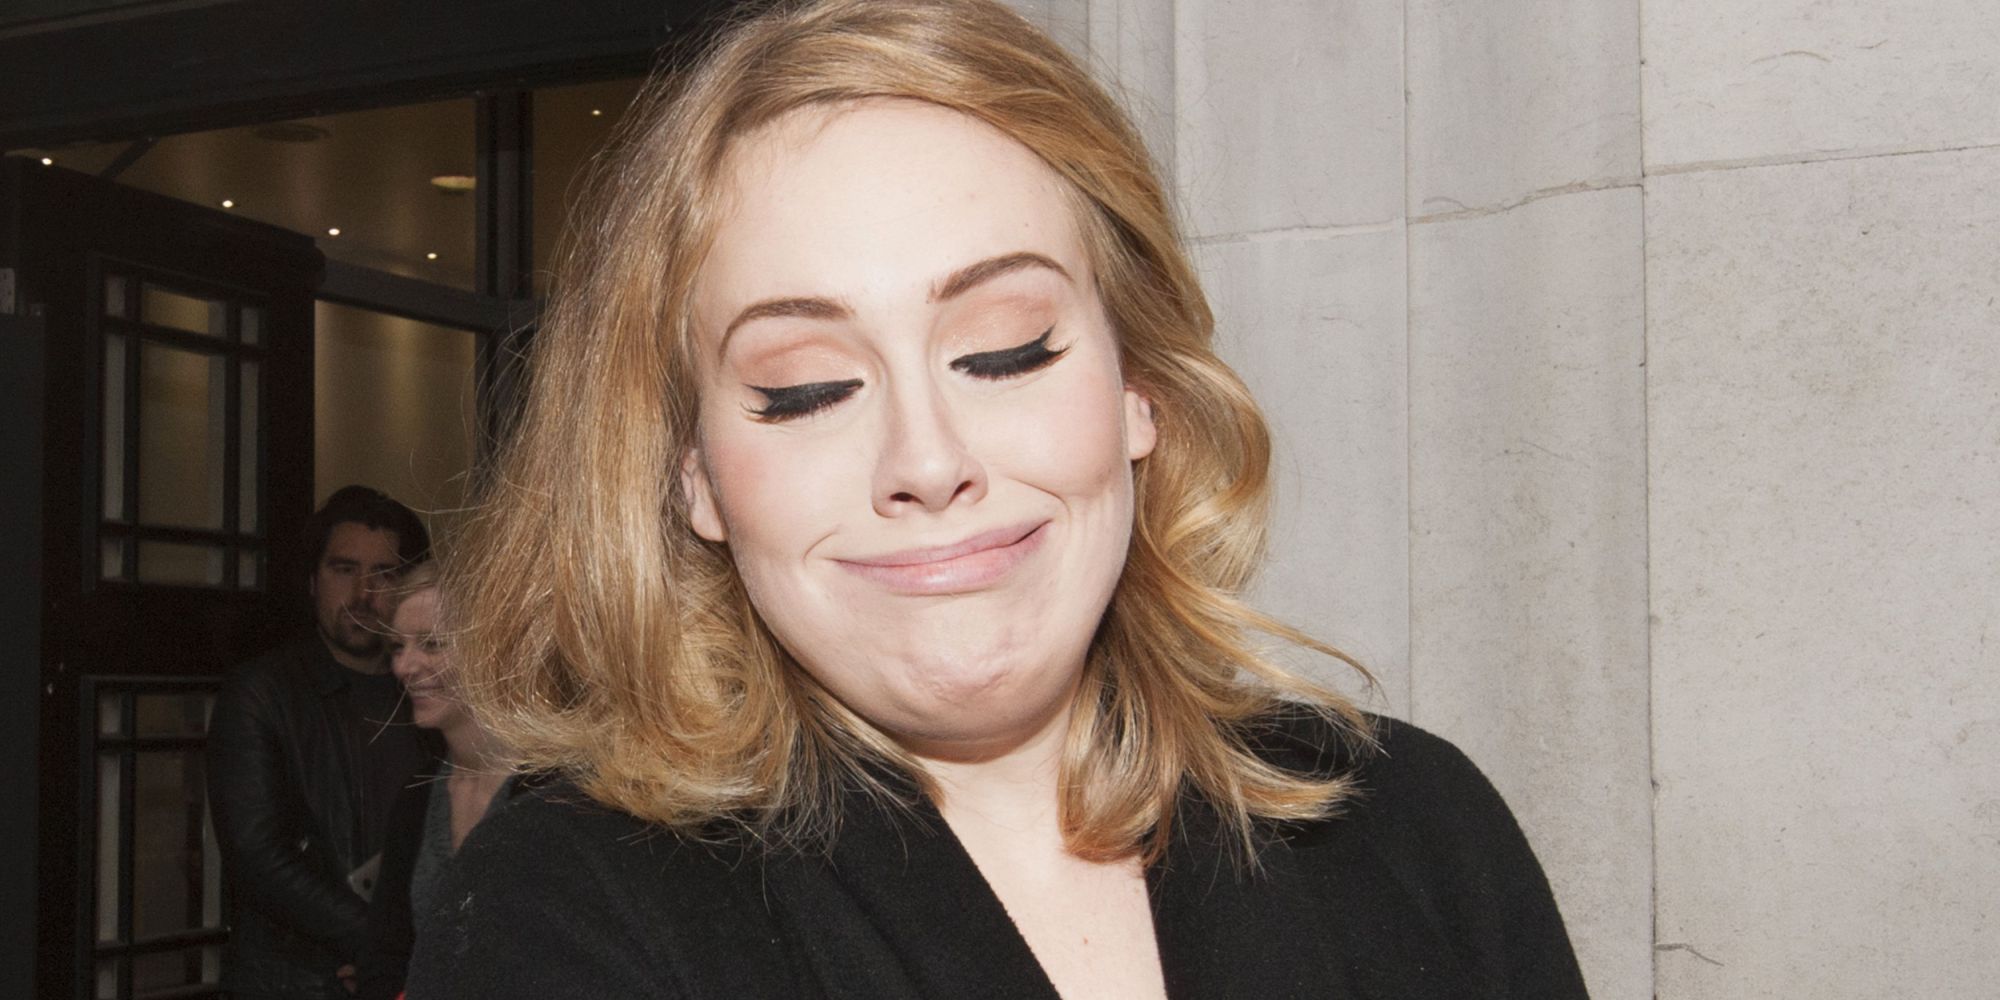 12 Life Lessons We Can All Learn from Adele